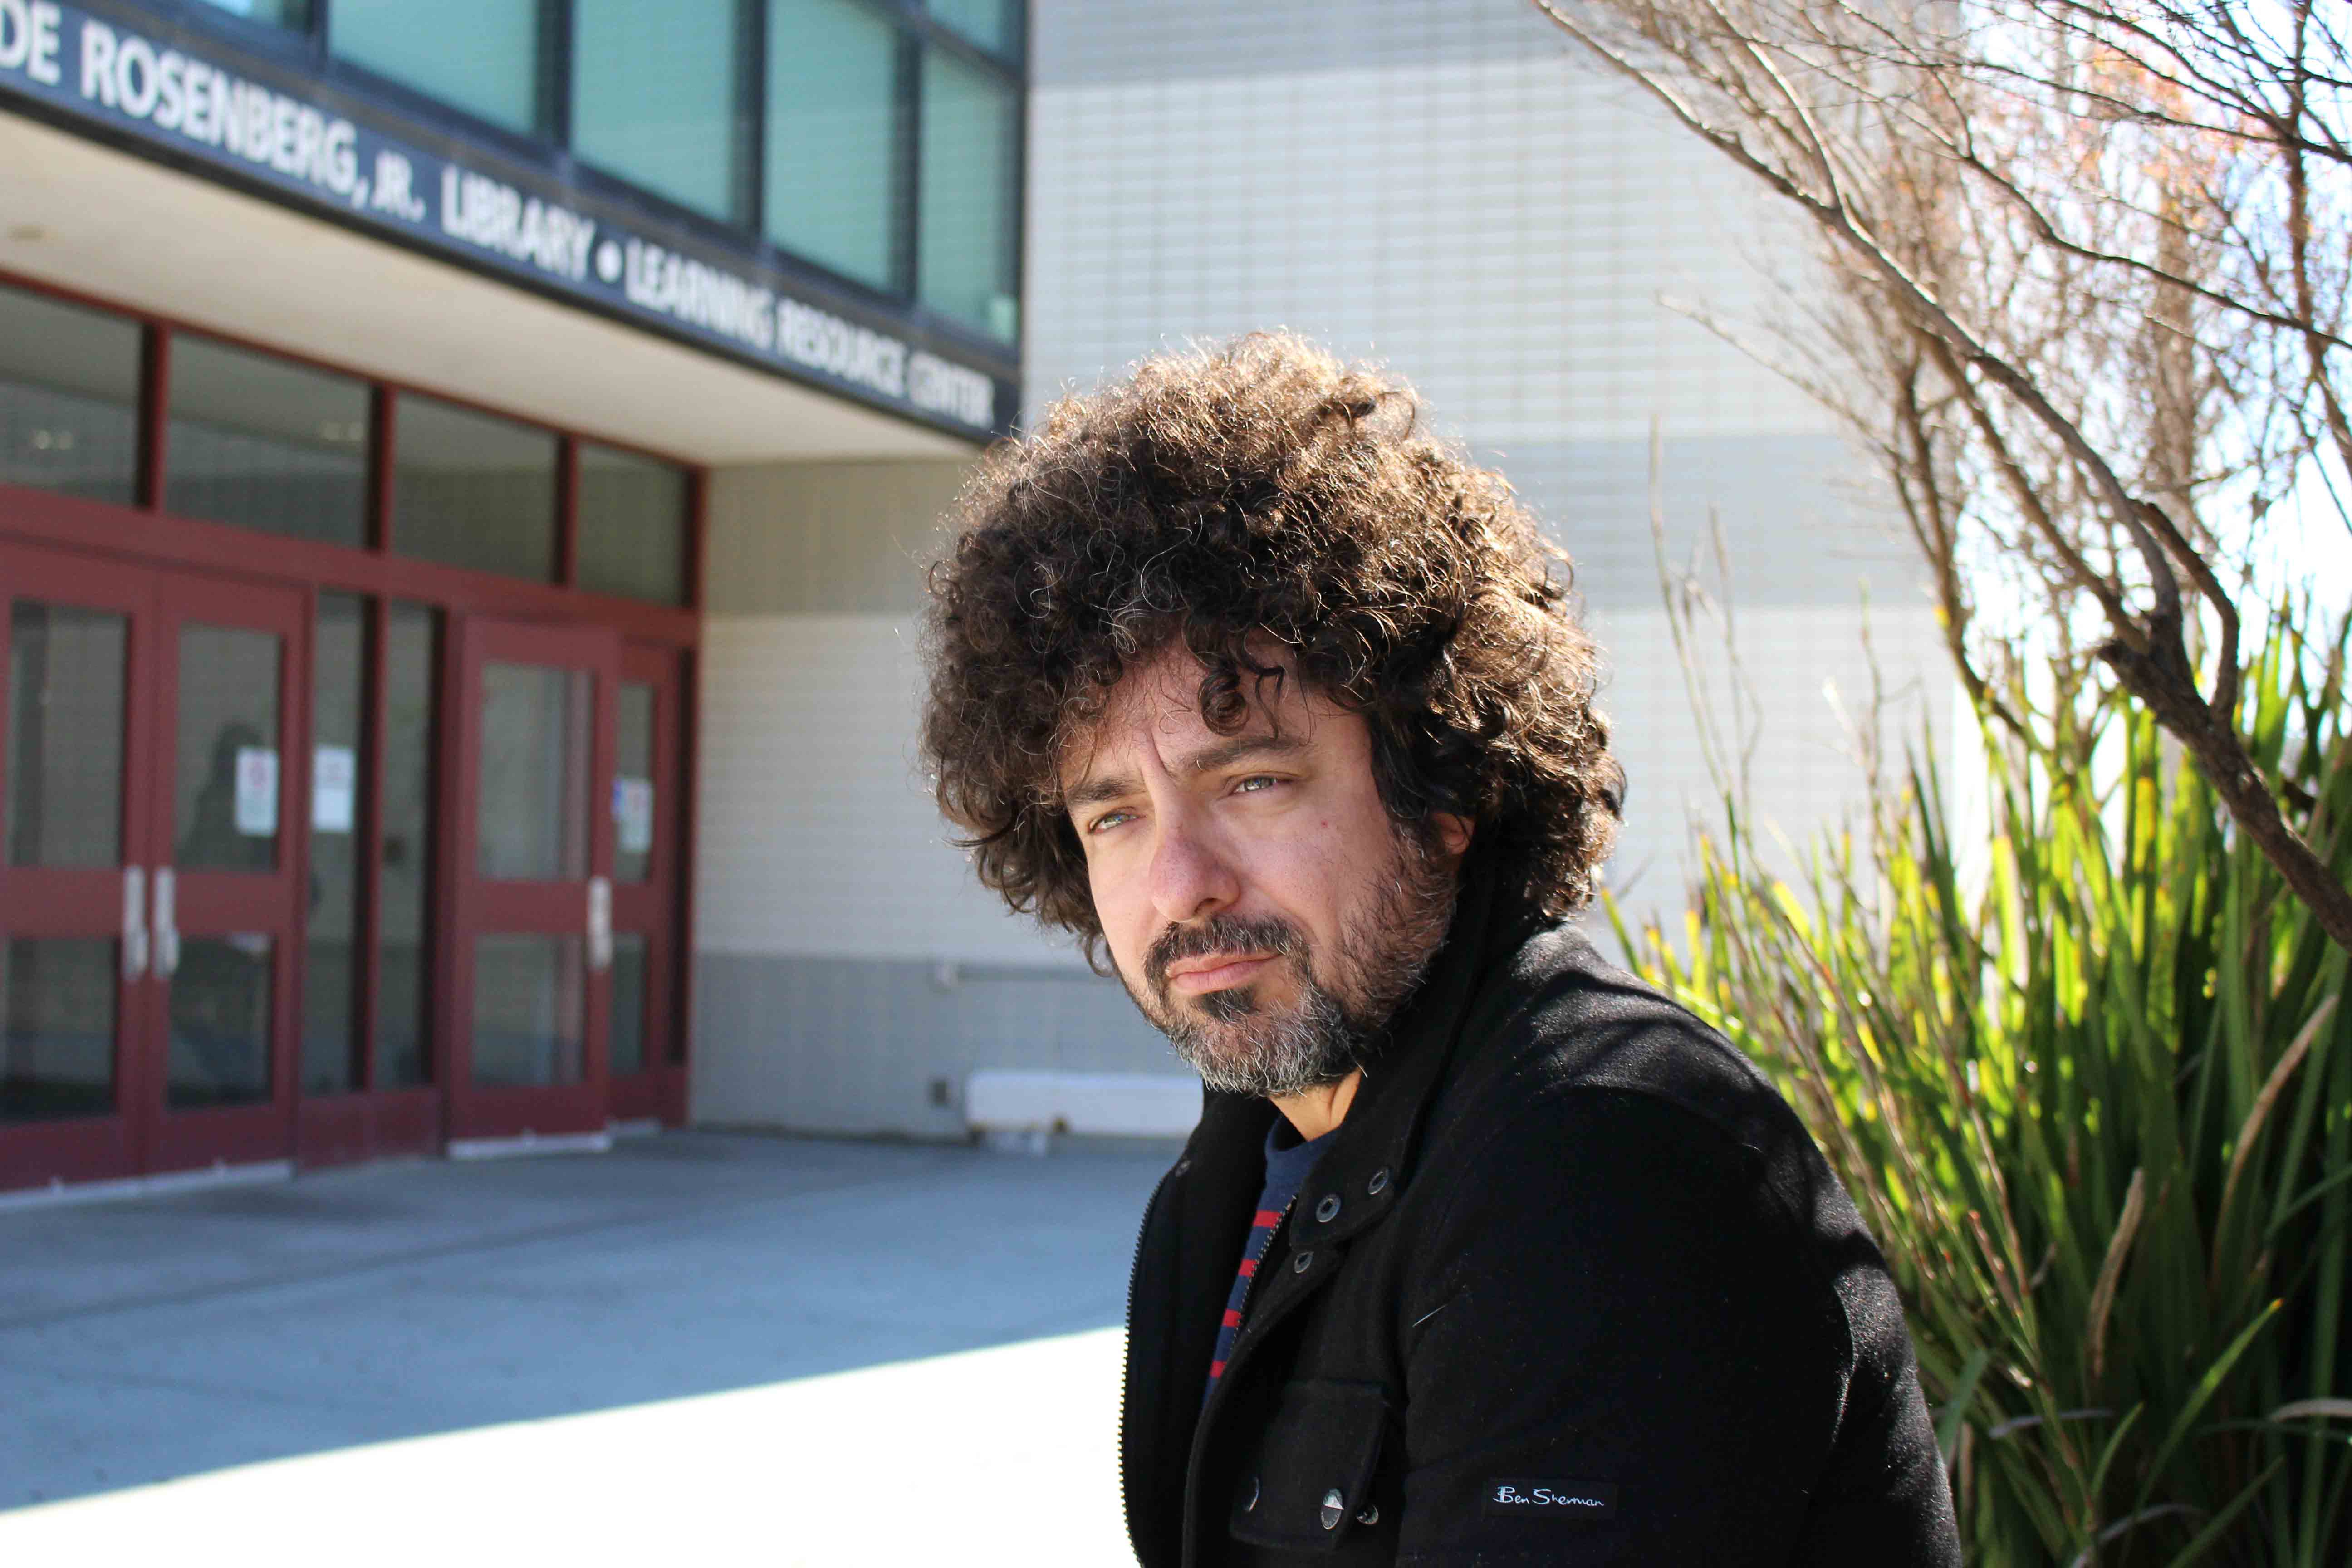 Musician, stand-up comedian, and City College philosophy instructor Michael Morales, outside the Rosenberg Library at Ocean Campus on Monday Nov. 16, 2015. (By Shannon Cole/The Guardsman)